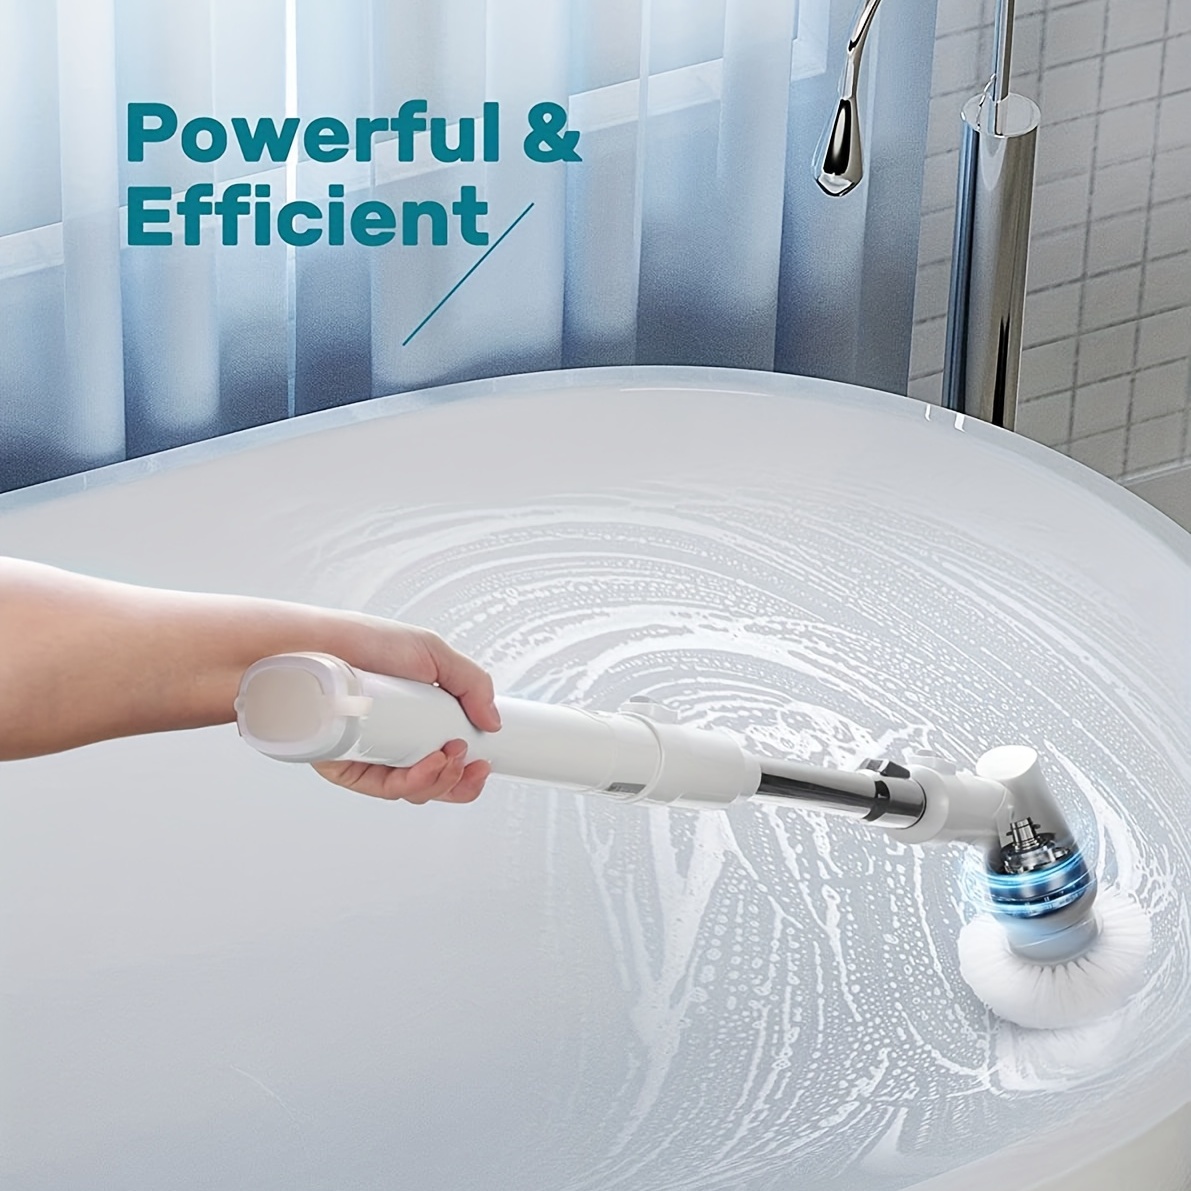 Electric Spin Scrubber, Power Cleaning Brush, Shower Scrubber With  Adjustable Extension Handle, Tub Tile Scrubber With 3 Replaceable Brush  Heads, 60 Min Run Time, 350rpm With High Torque Cordless Power Scrubber,  Cleaning